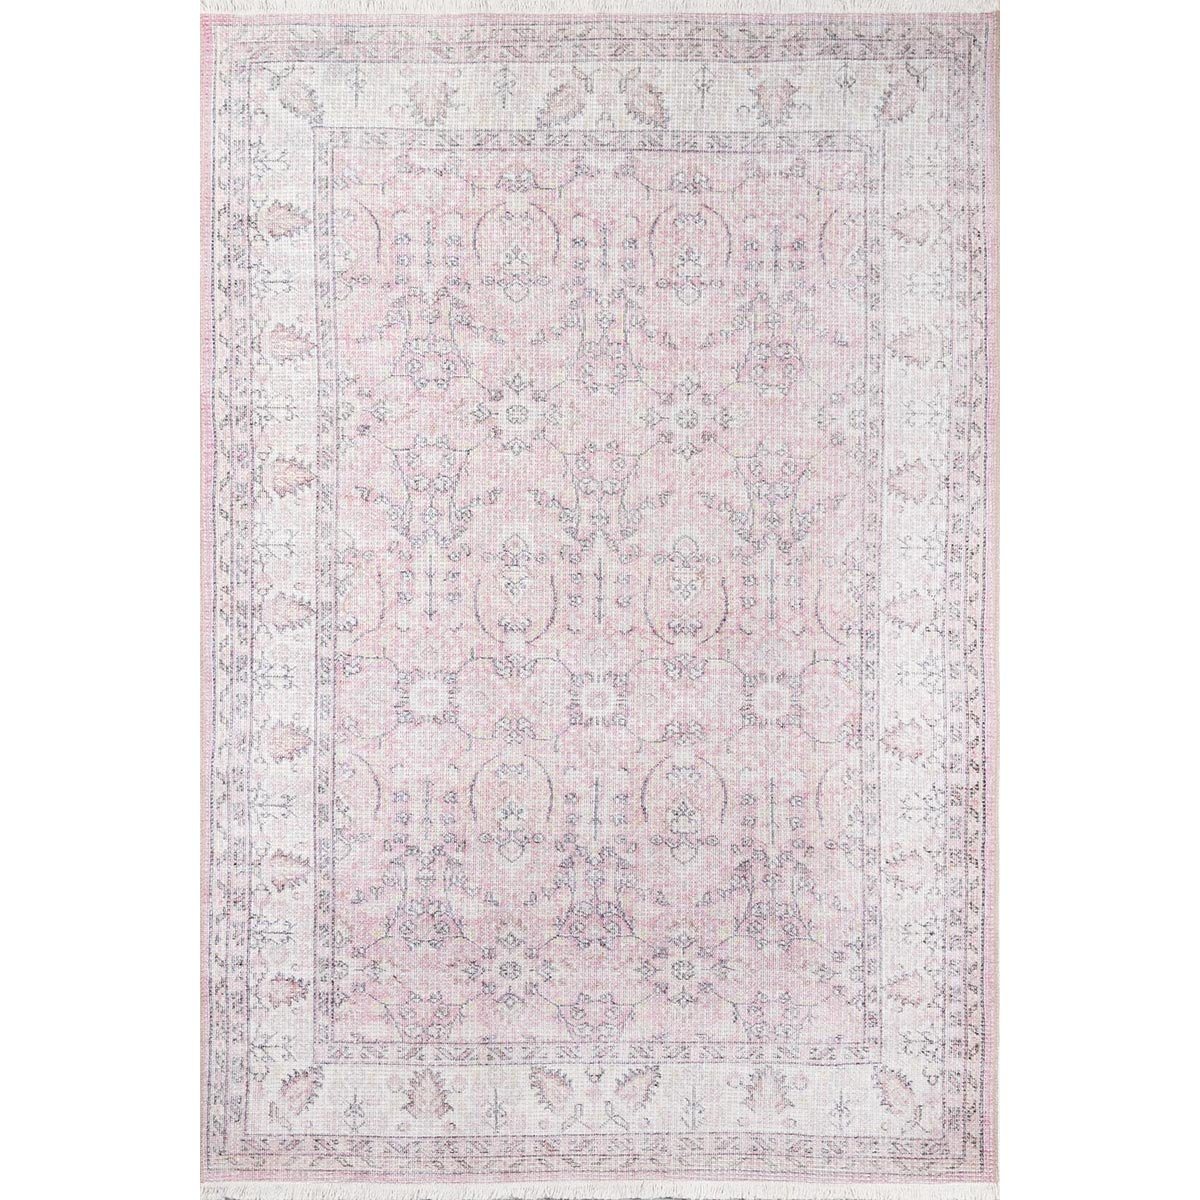 Finlay Rug - Pink 2' X 3'. Top view.